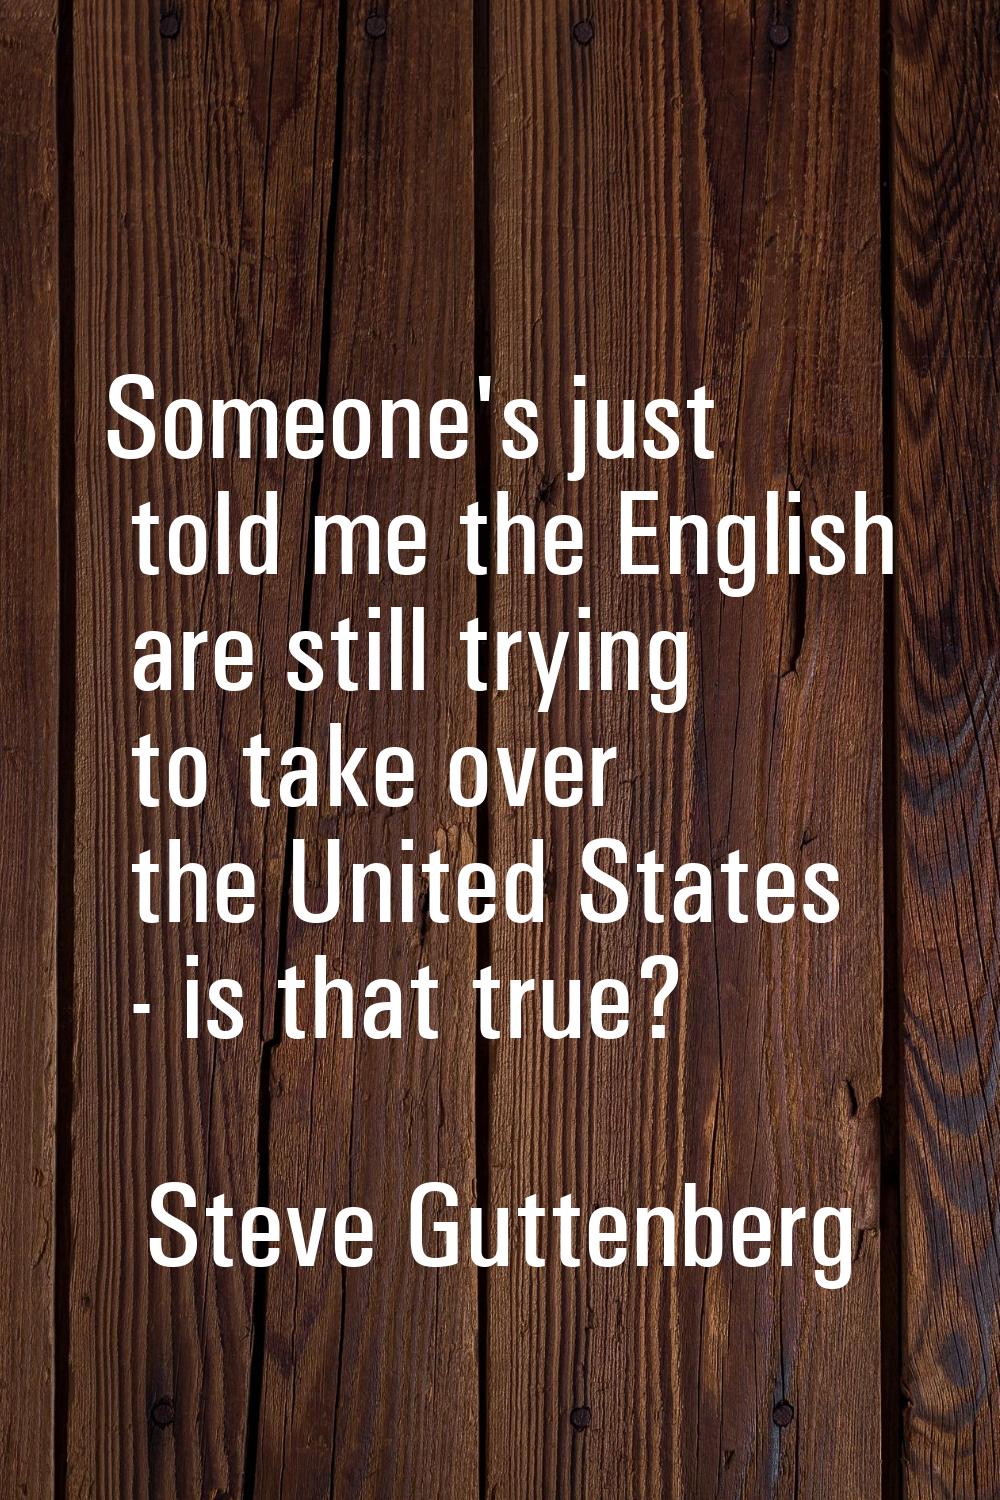 Someone's just told me the English are still trying to take over the United States - is that true?